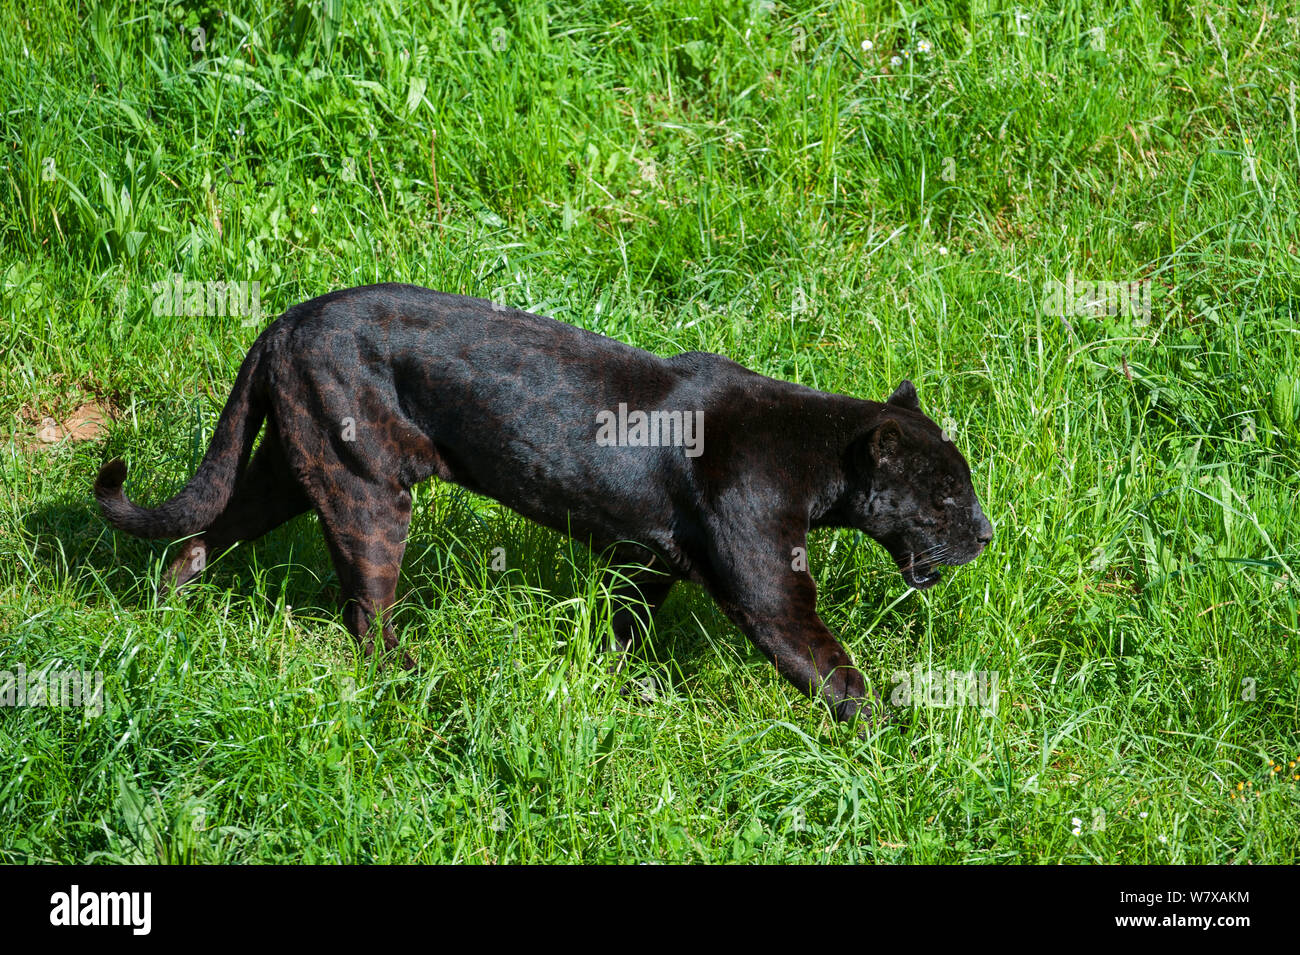 Black / melanistic jaguar (Panthera onca) with spots still visible, Cabarceno Park, Cantabria, Spain. Captive, occurs in Central and South America. Stock Photo